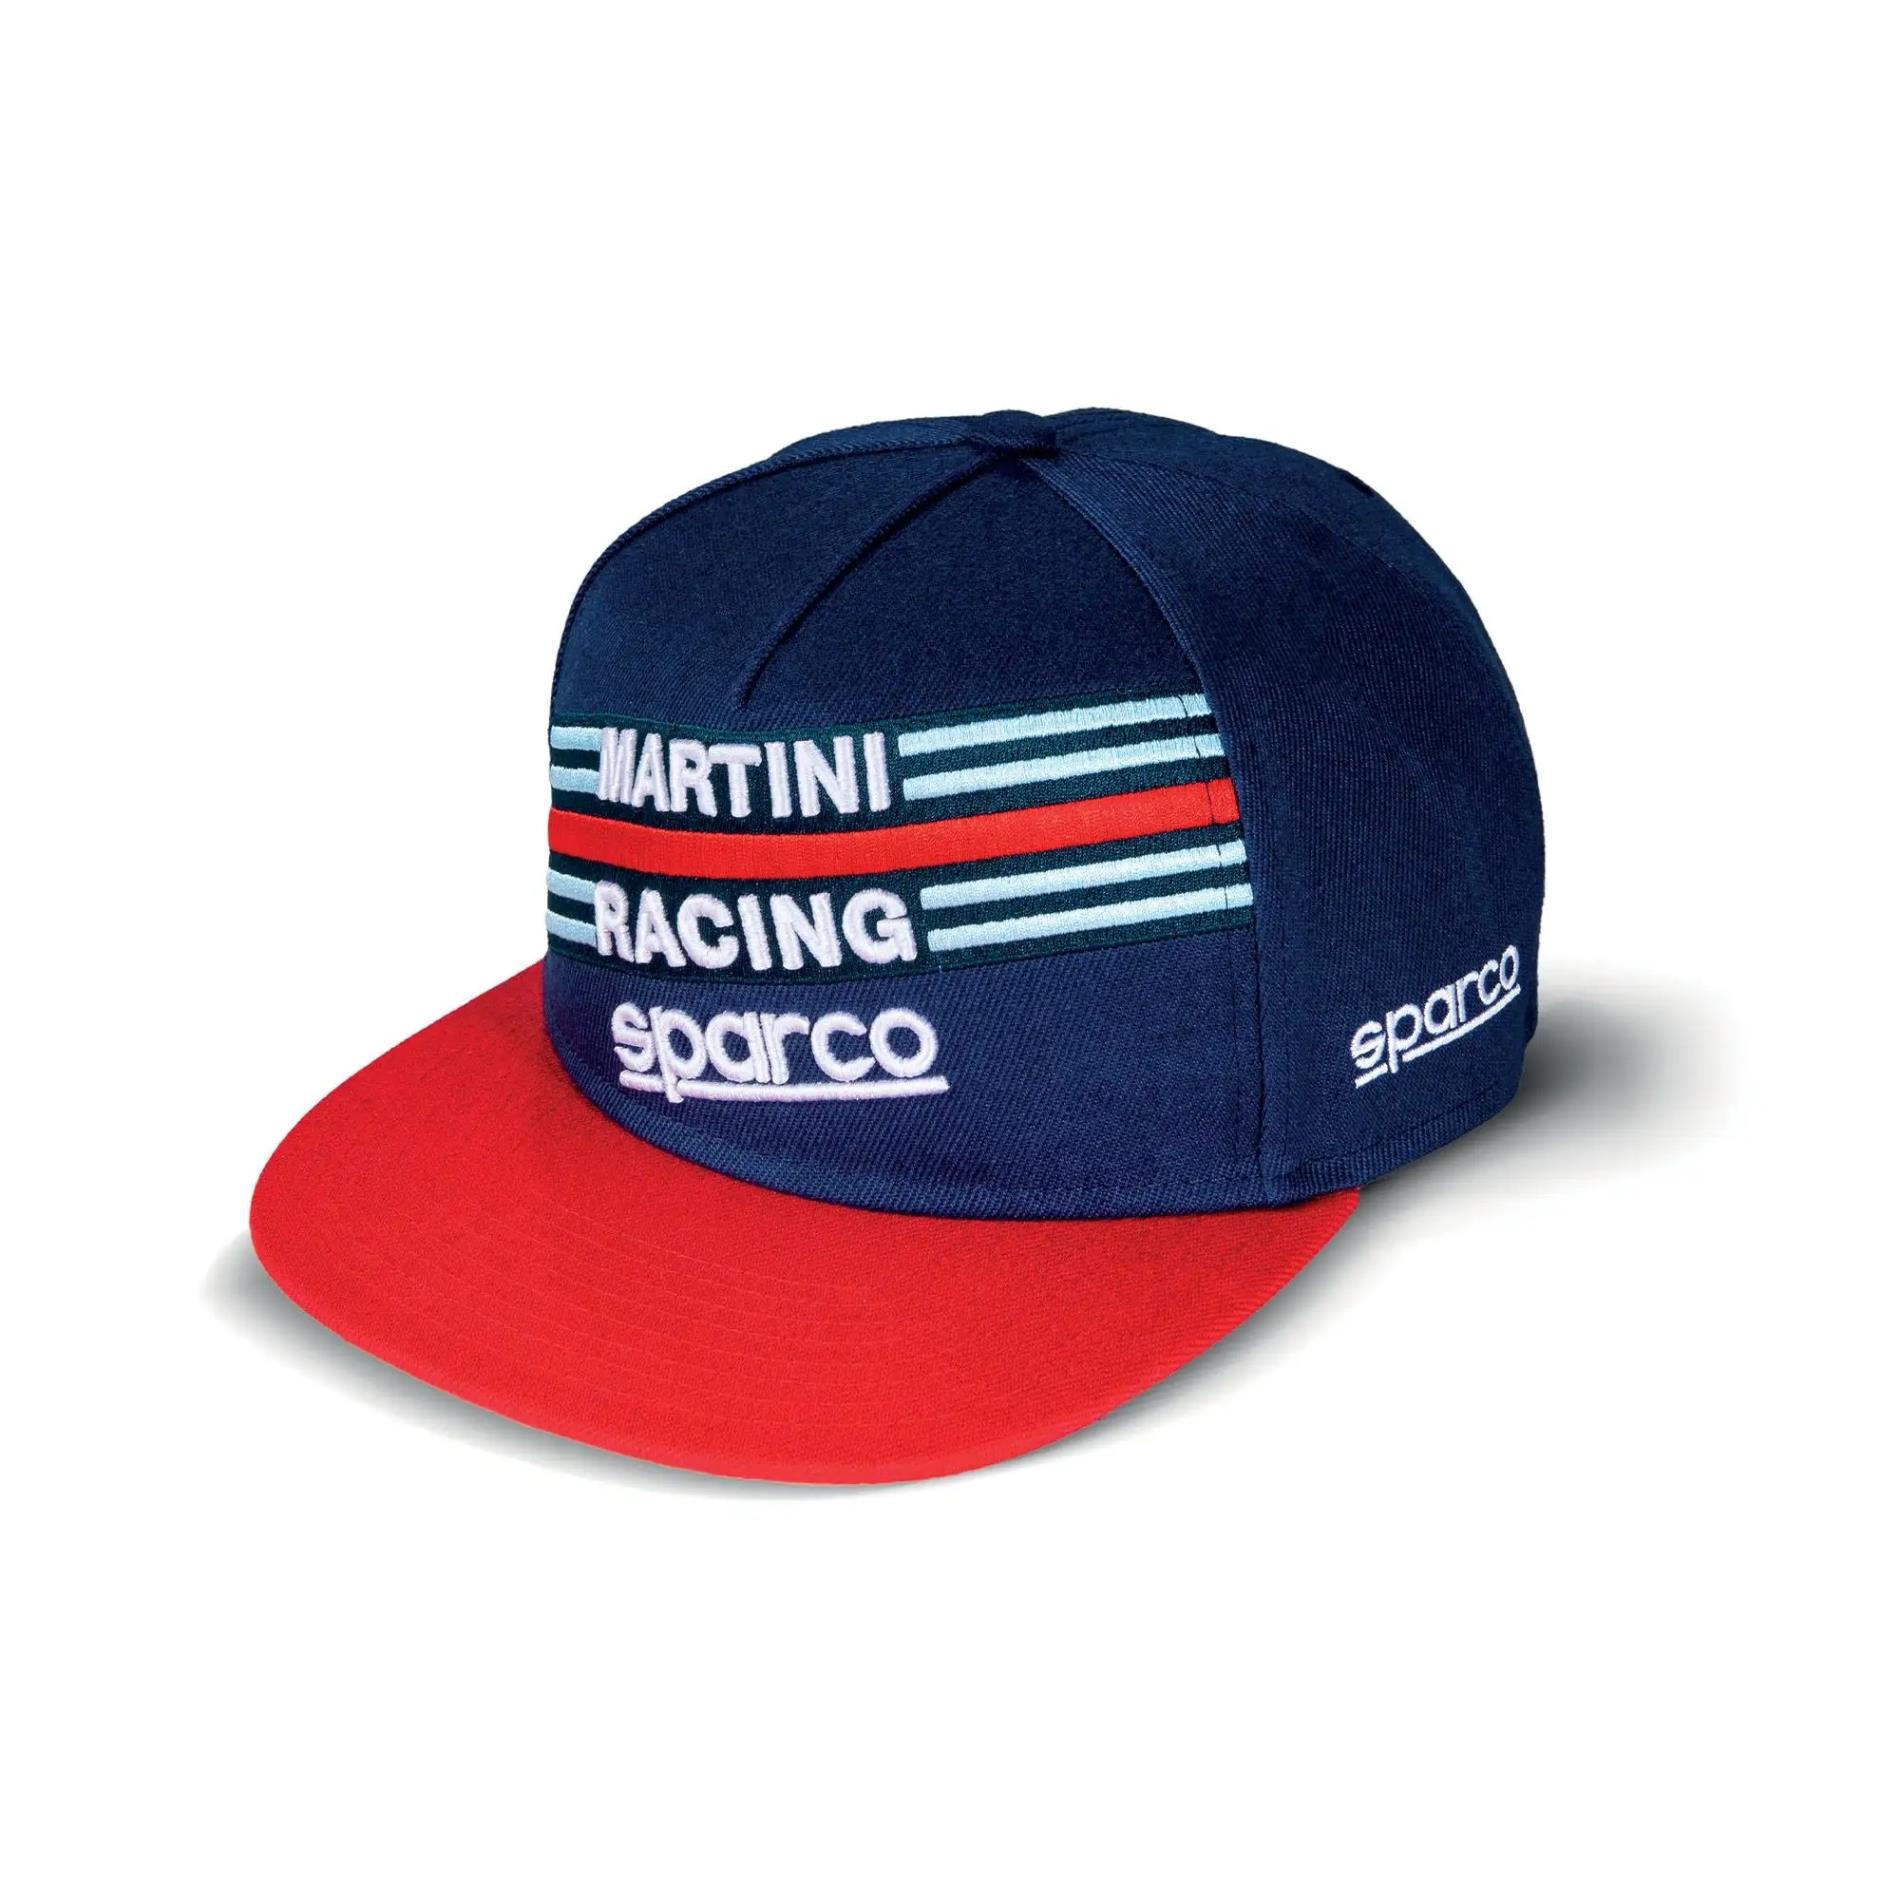 Flex Martini Racing cap by Sparco